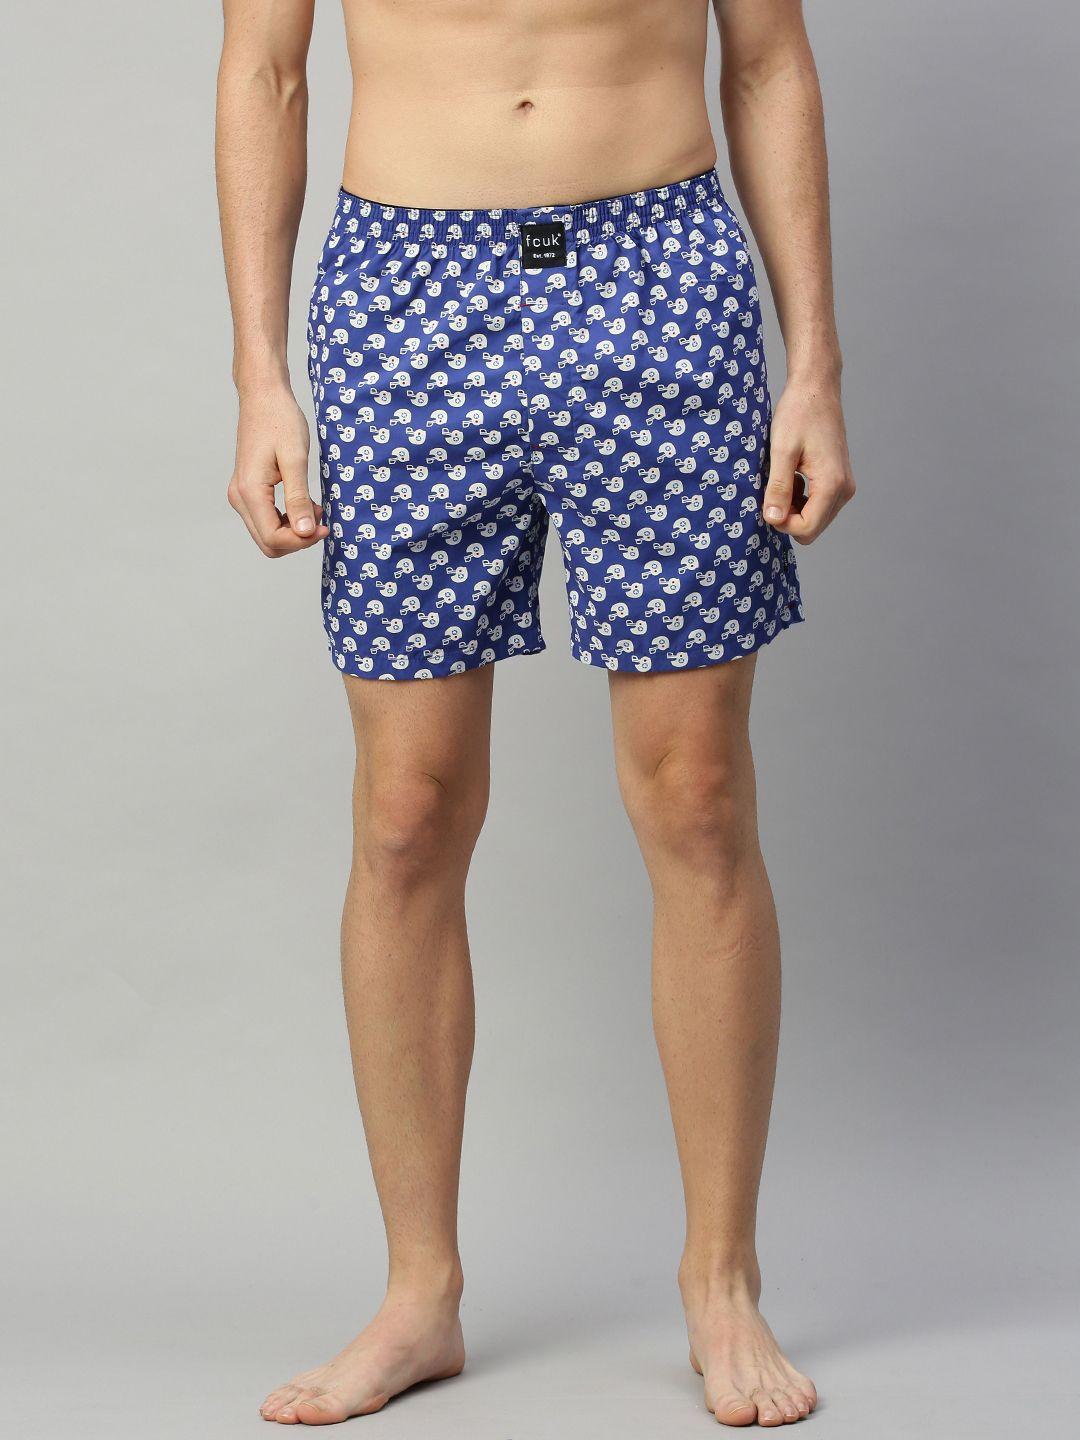 fcuk men's blue and white printed pure cotton boxers